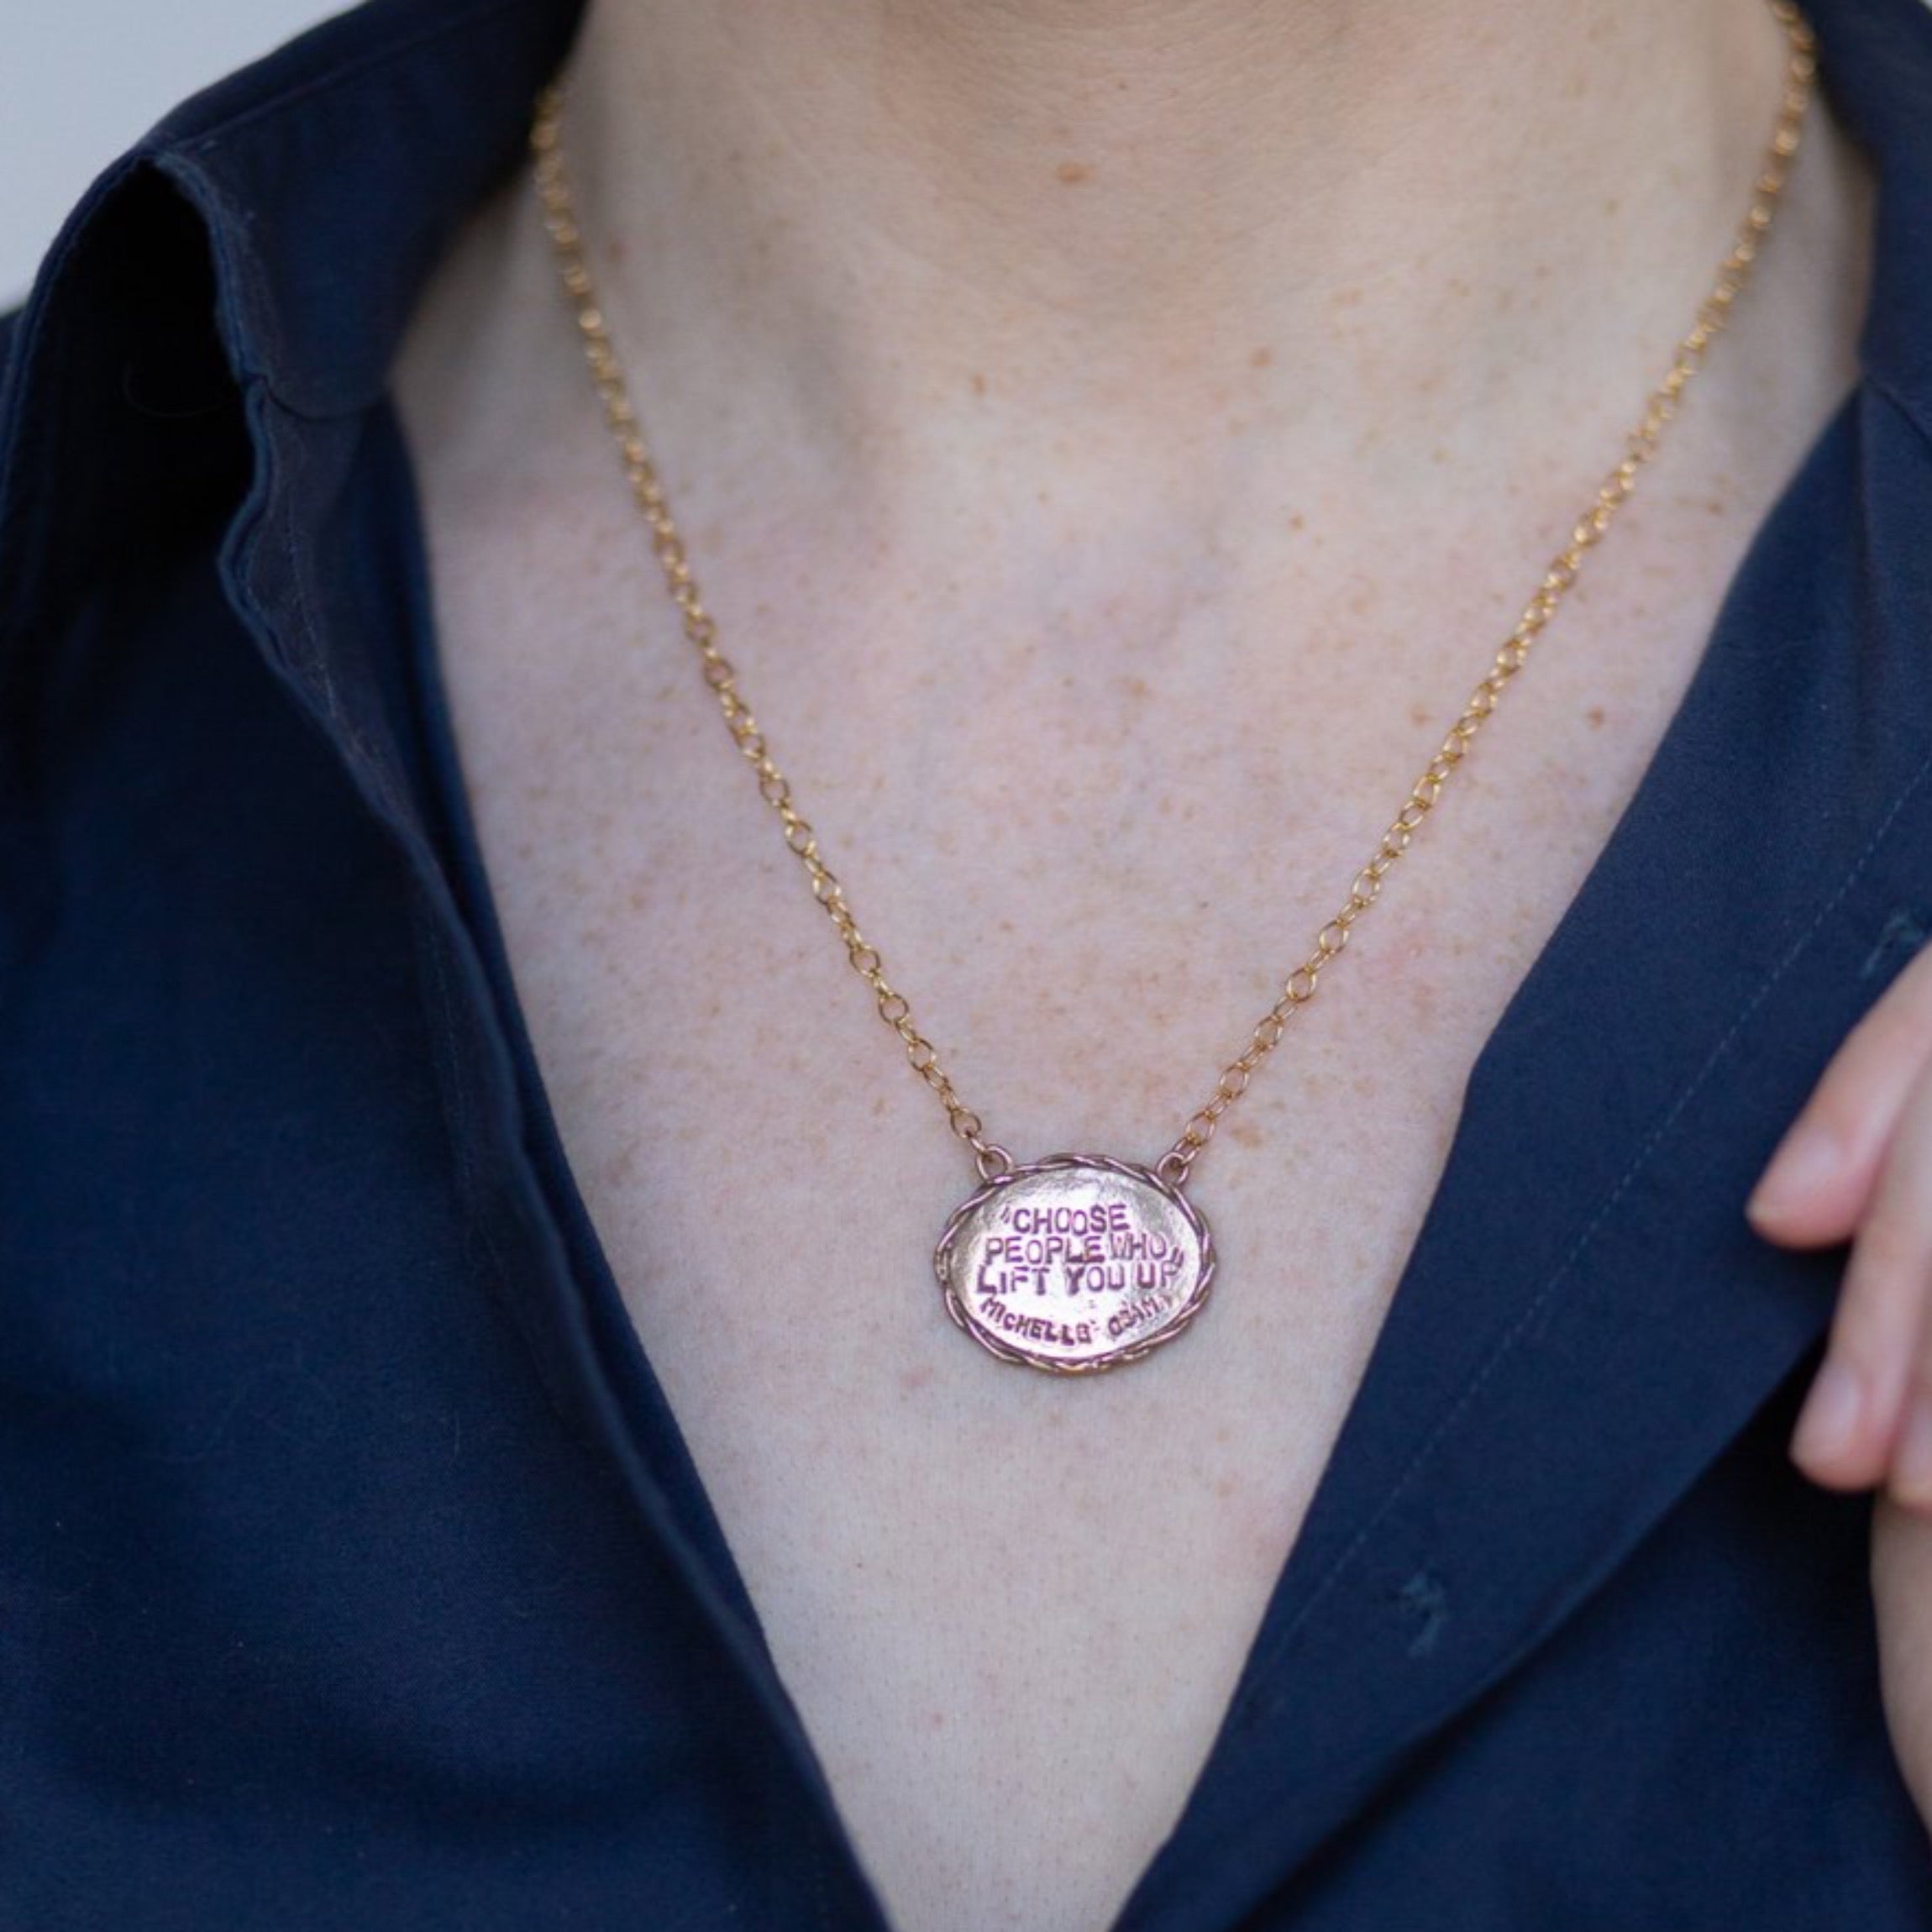 Bronze oval necklace on a woman in a navy button down "Choose People Who Lift You UP"